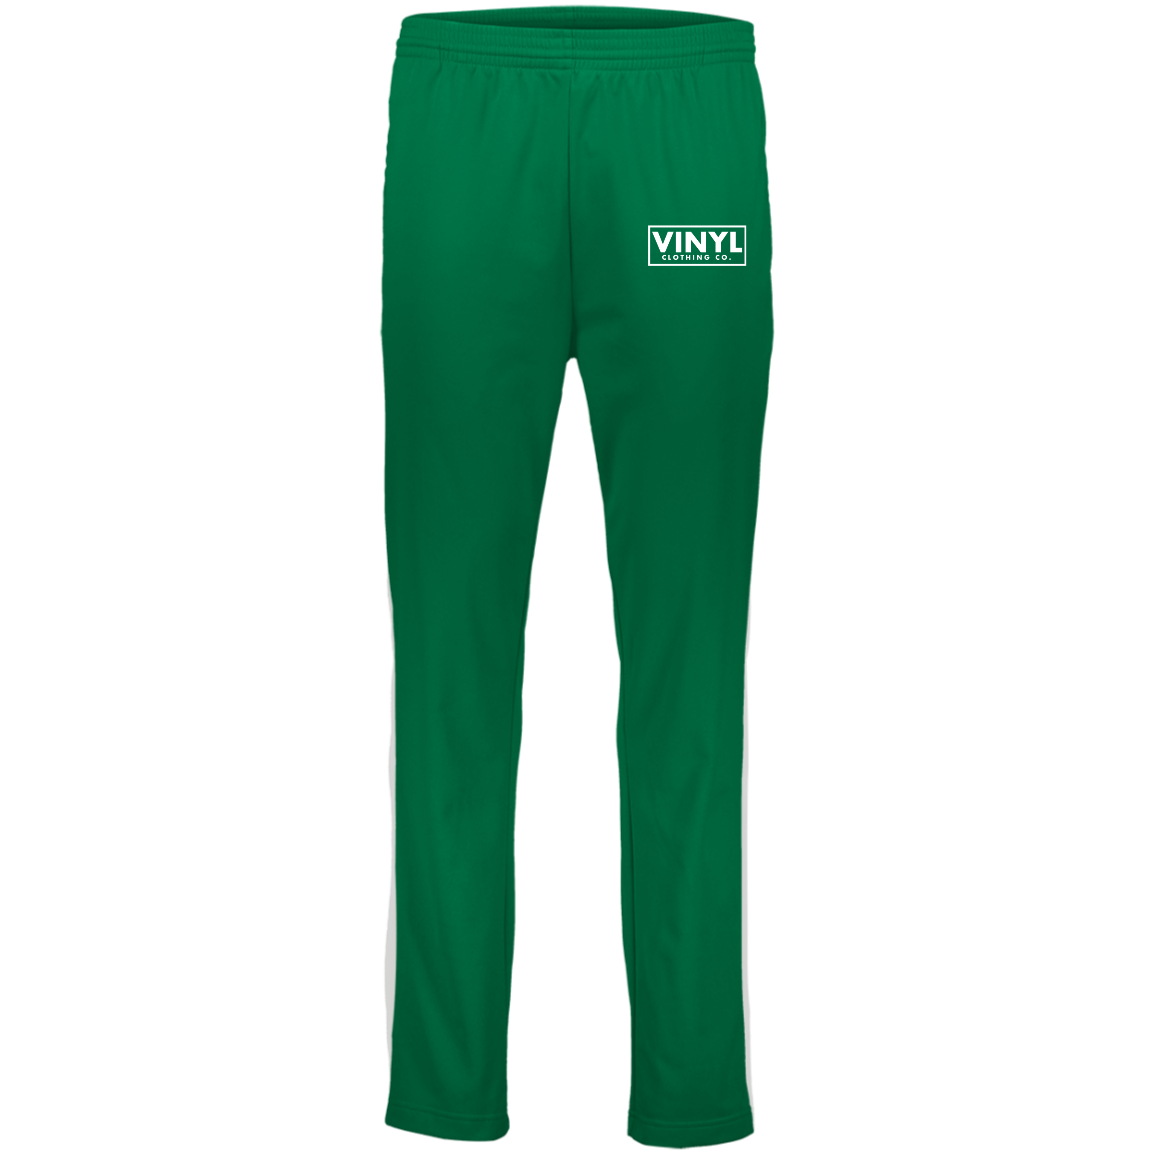 Vinyl Clothing Co. Augusta Youth Performance Colorblock Pants